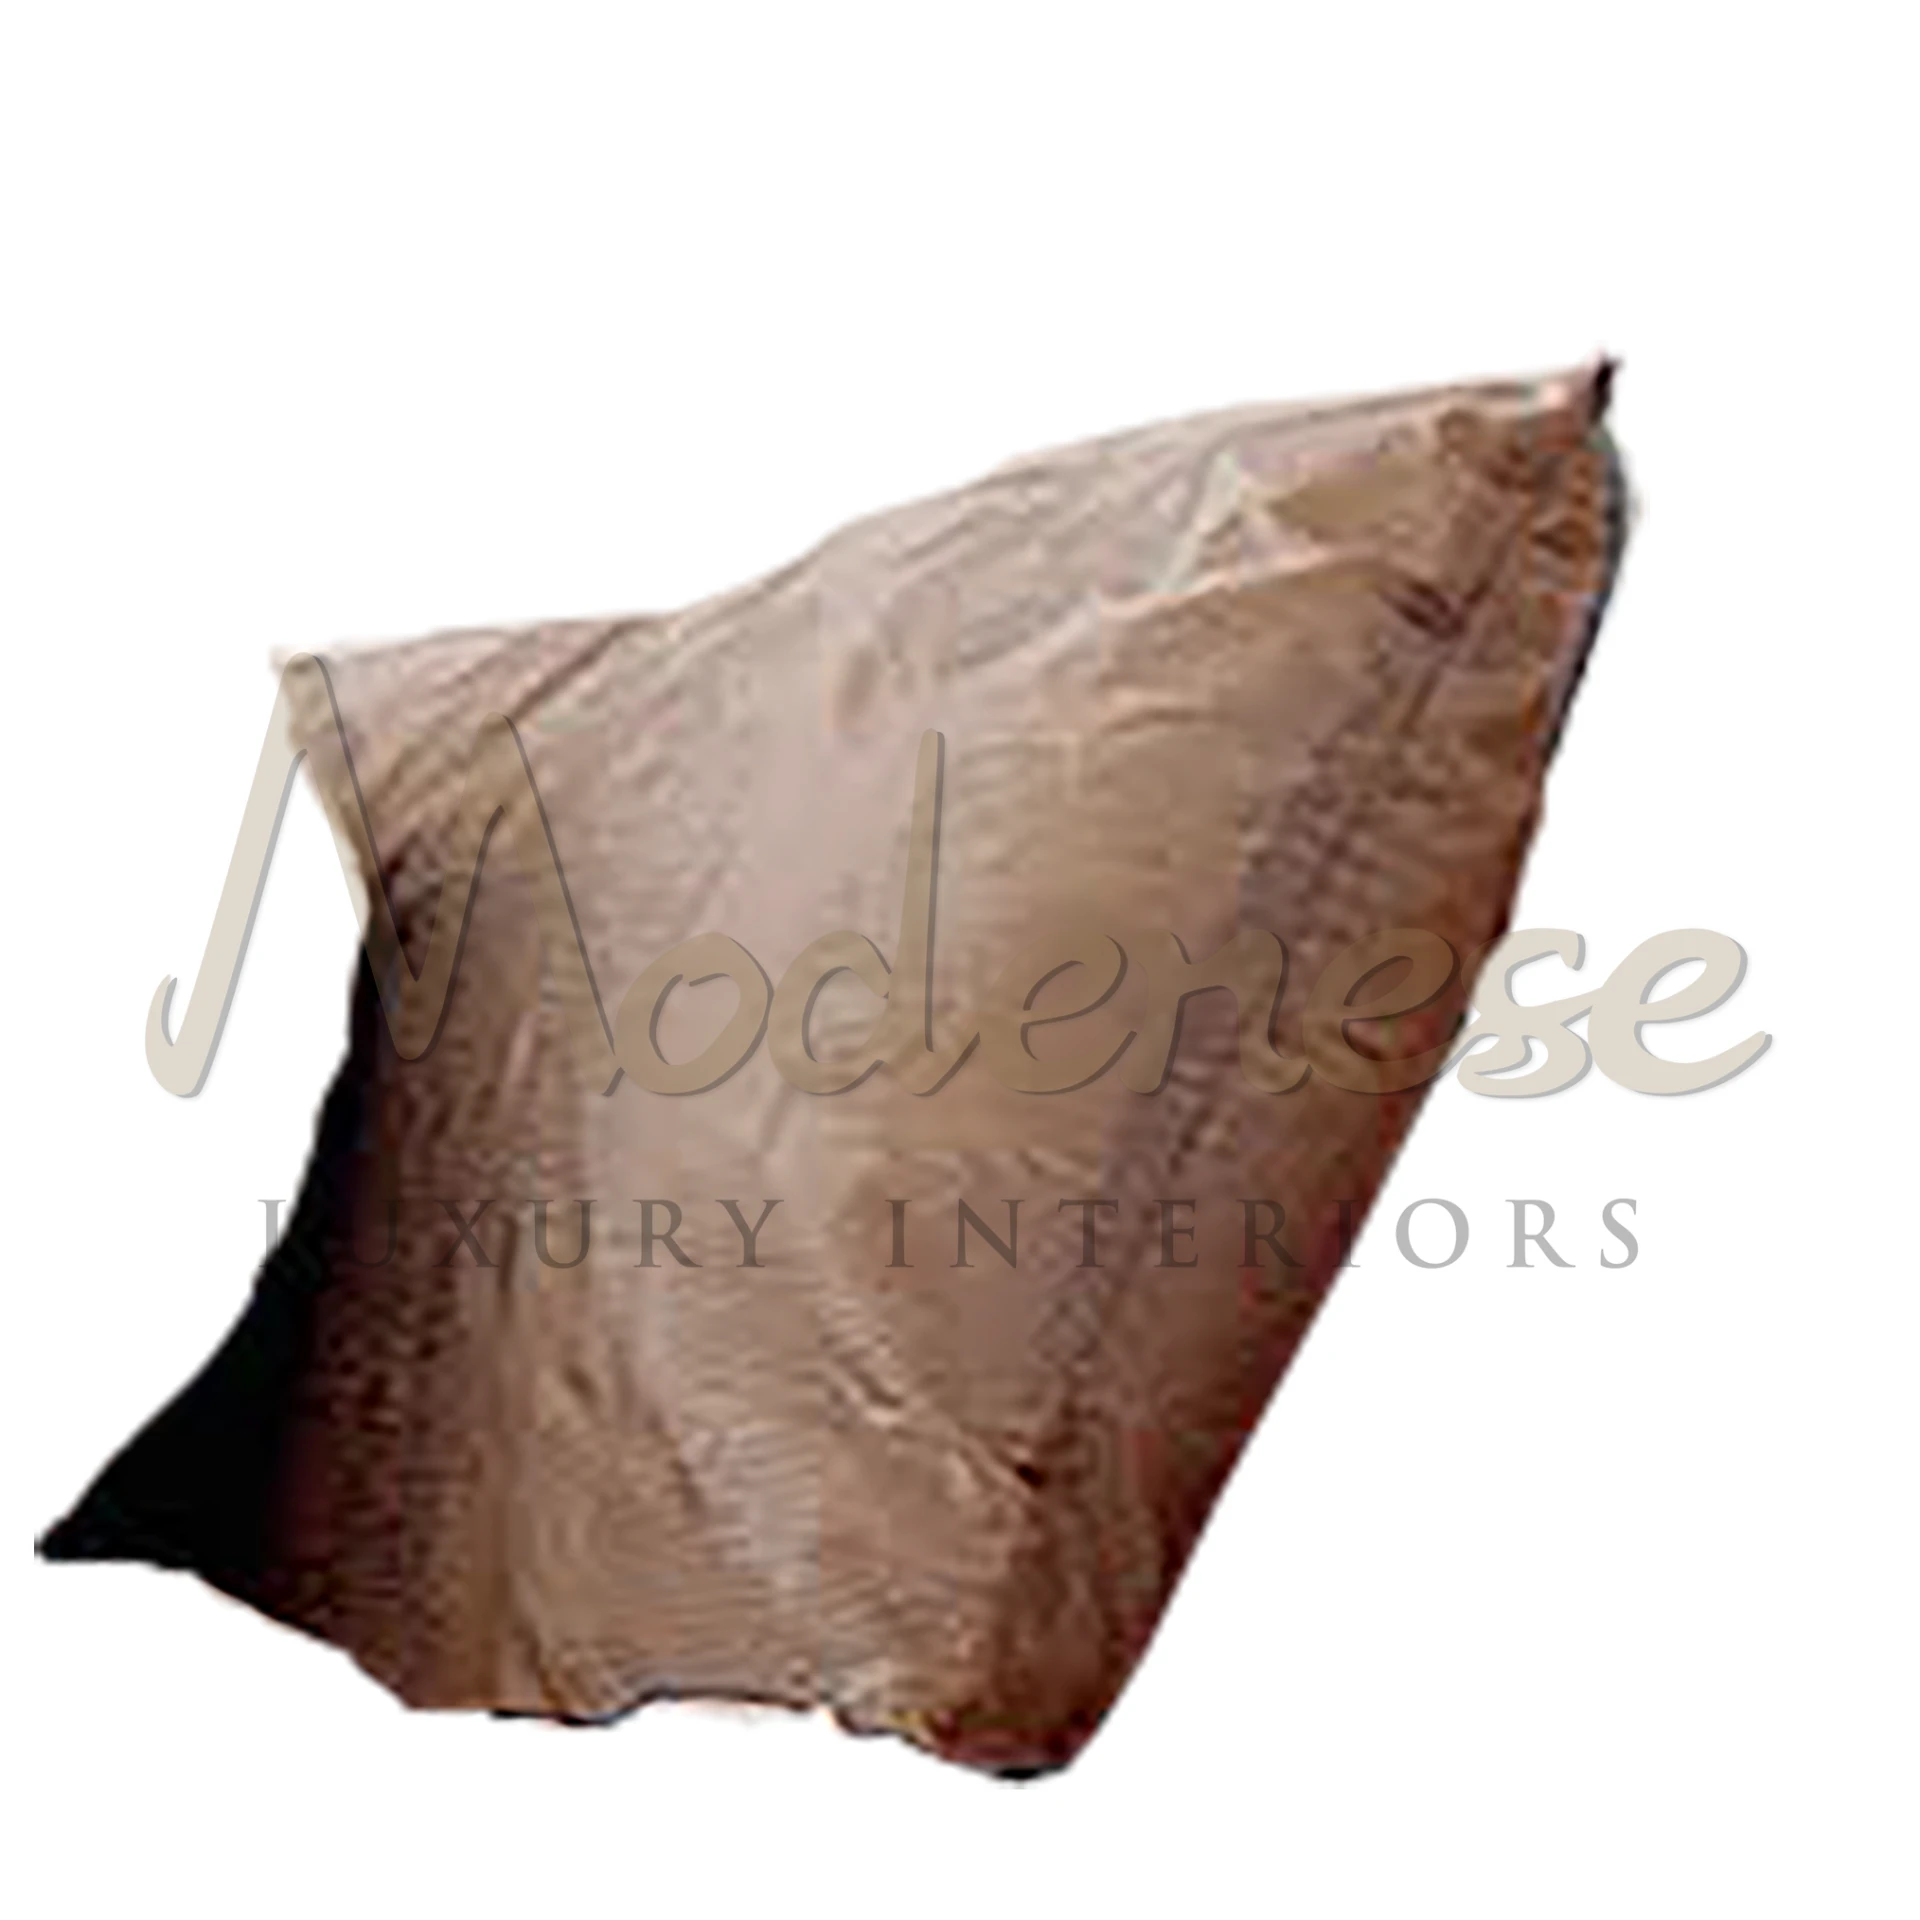 Traditional Beige Pillow, versatile and elegant, perfect for serene interiors with luxury Italian textiles.